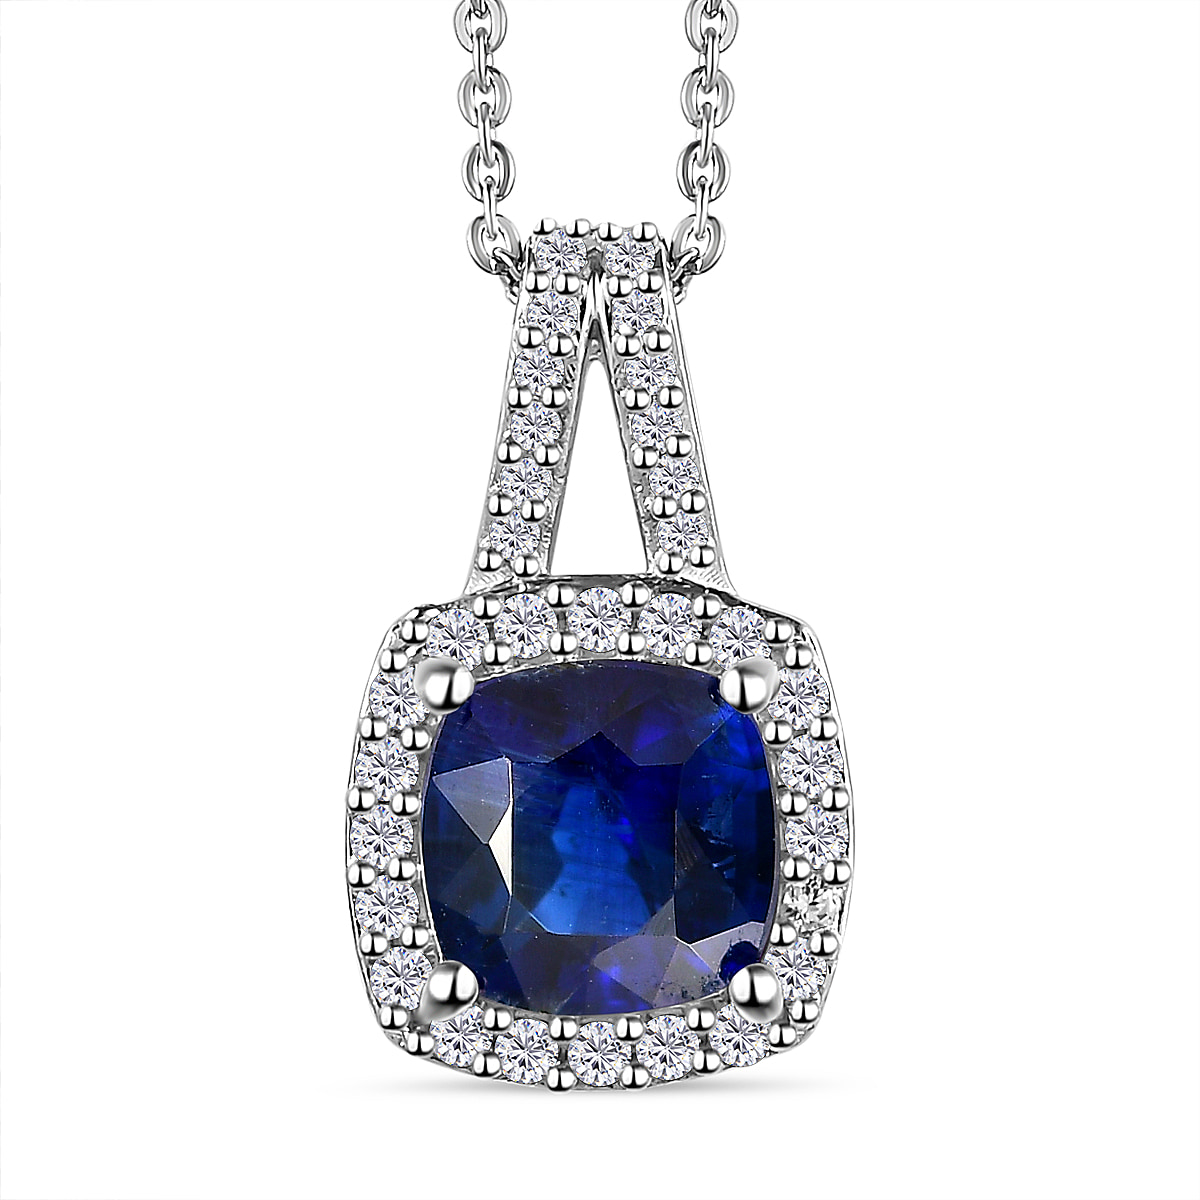 Natural Himalayan Kyanite & Natural Zircon Pendant with Chain (Size 20) in Platinum Overlay Sterling Silver 2.33 Ct.